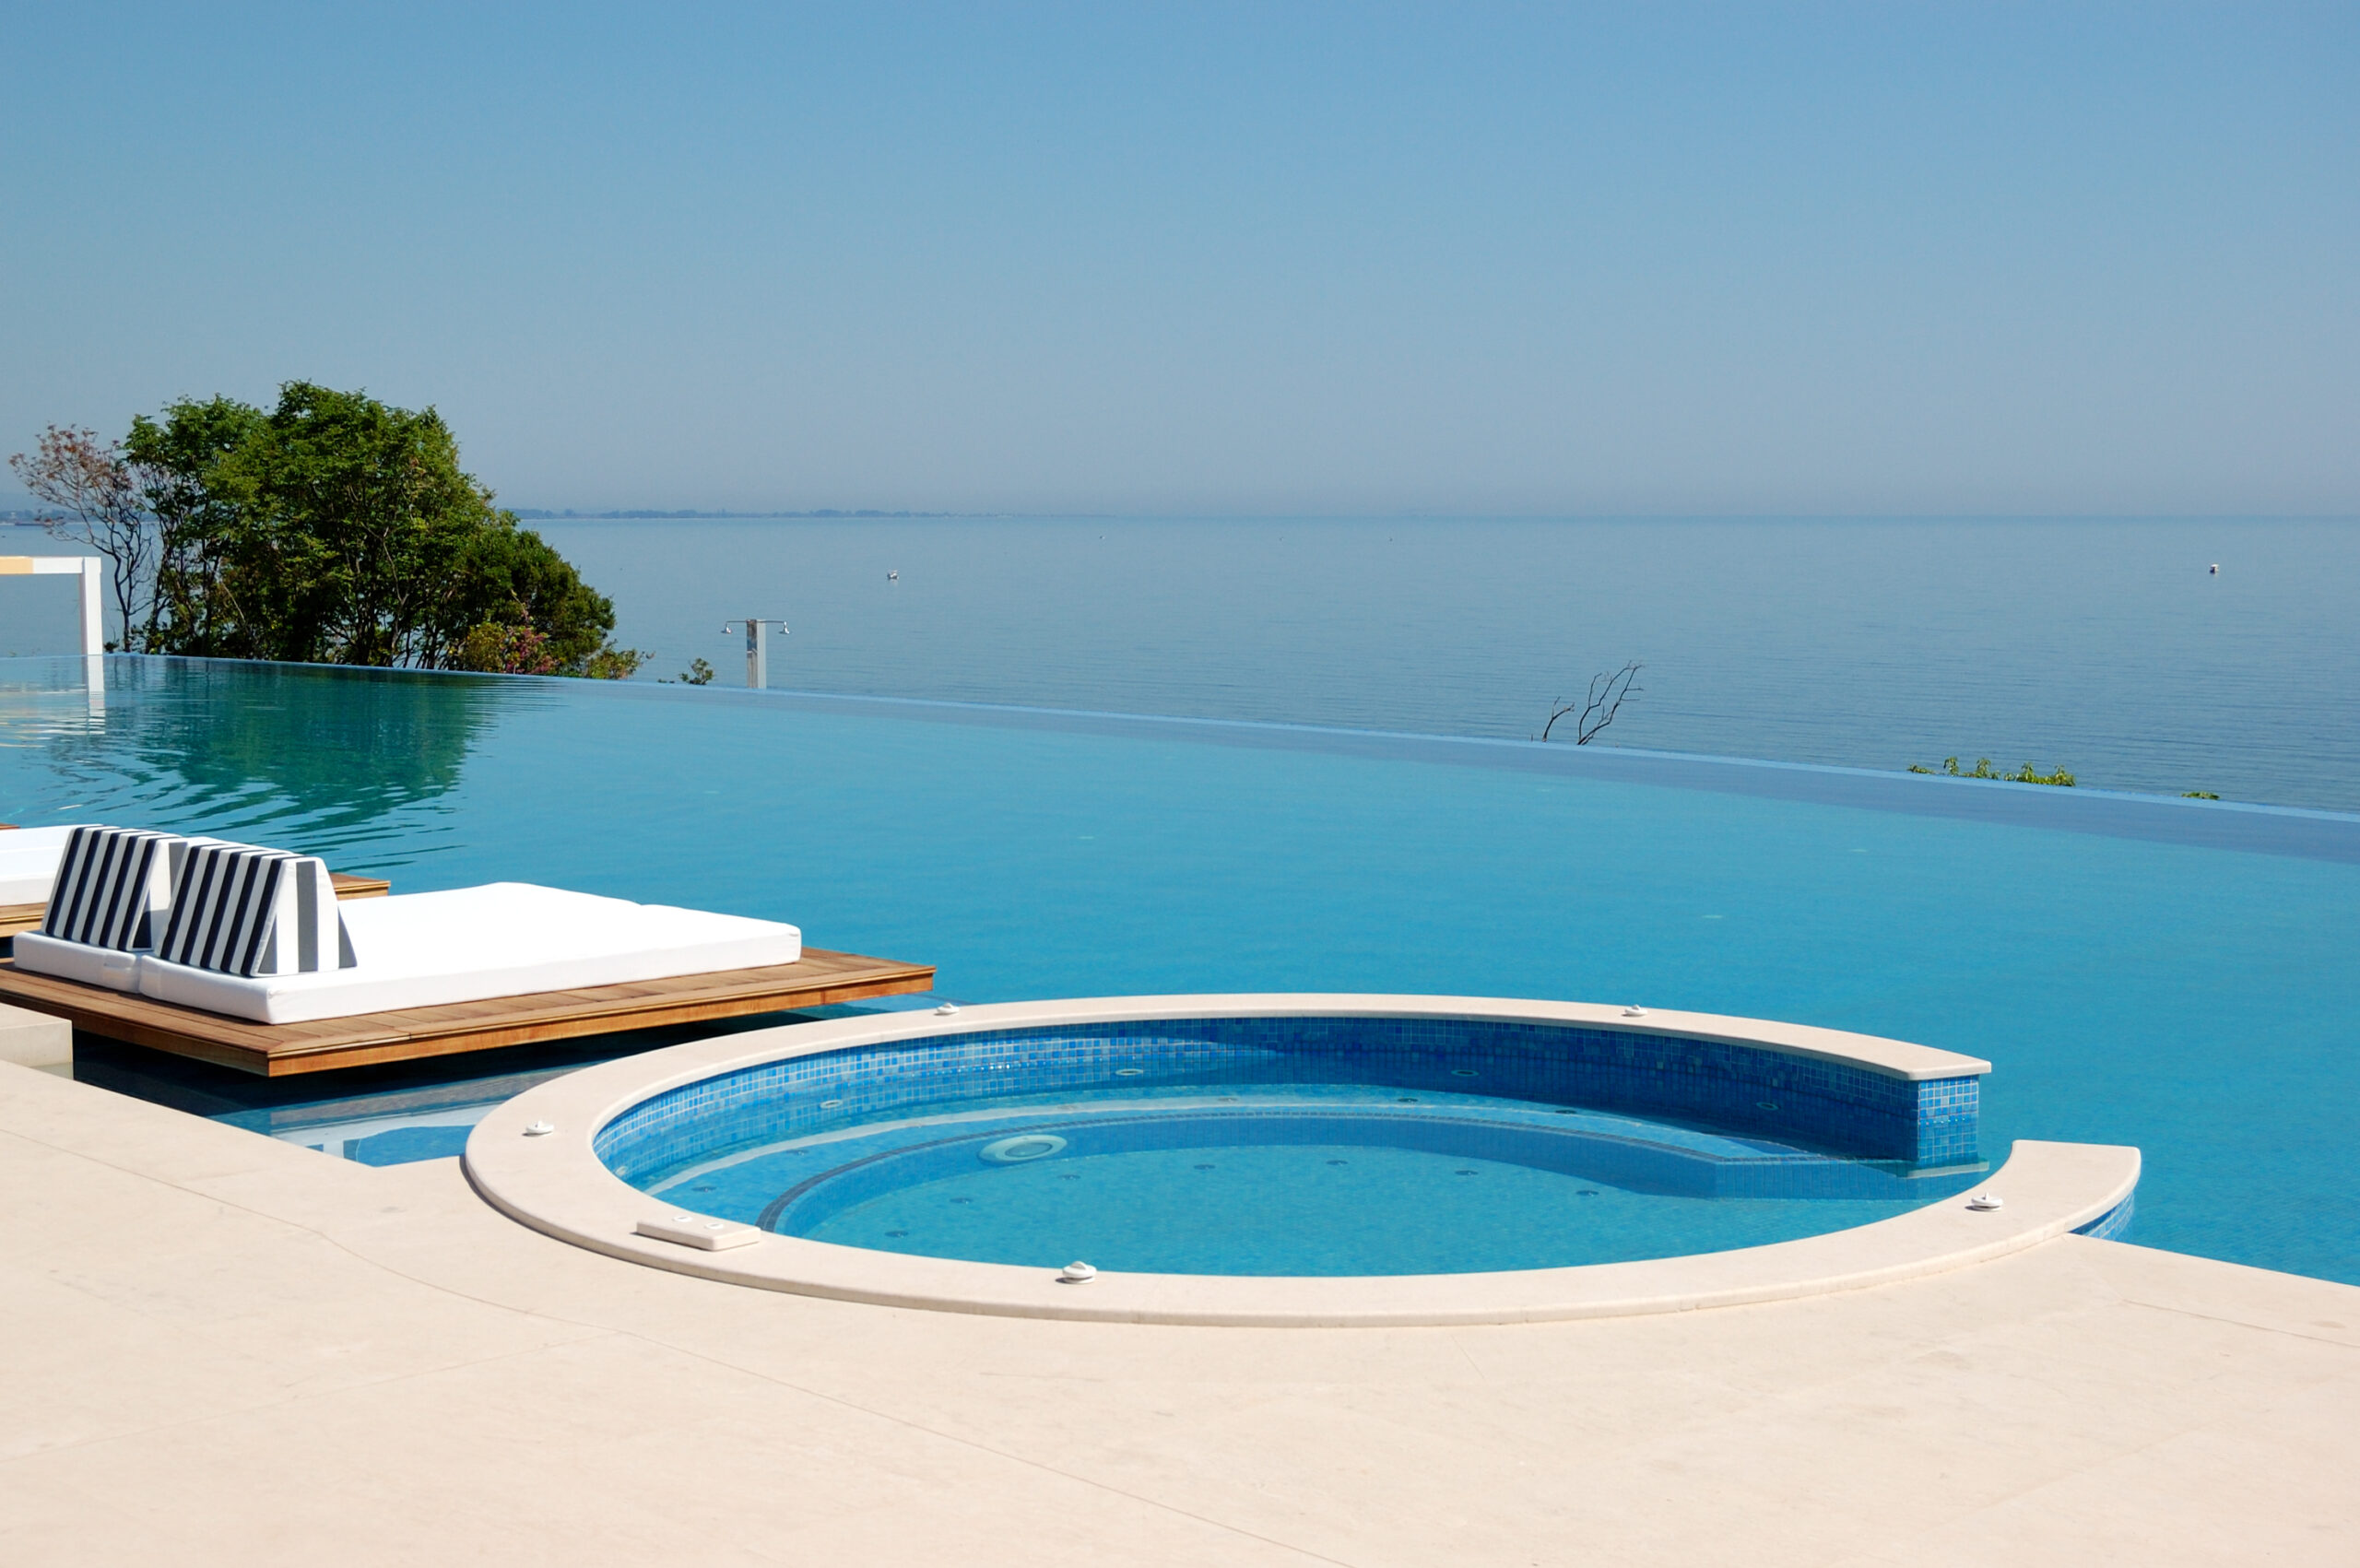 An infinity pool, also known as a vanishing-edge pool, with water seemingly extending to the horizon, creating a visually stunning and luxurious swimming experience.